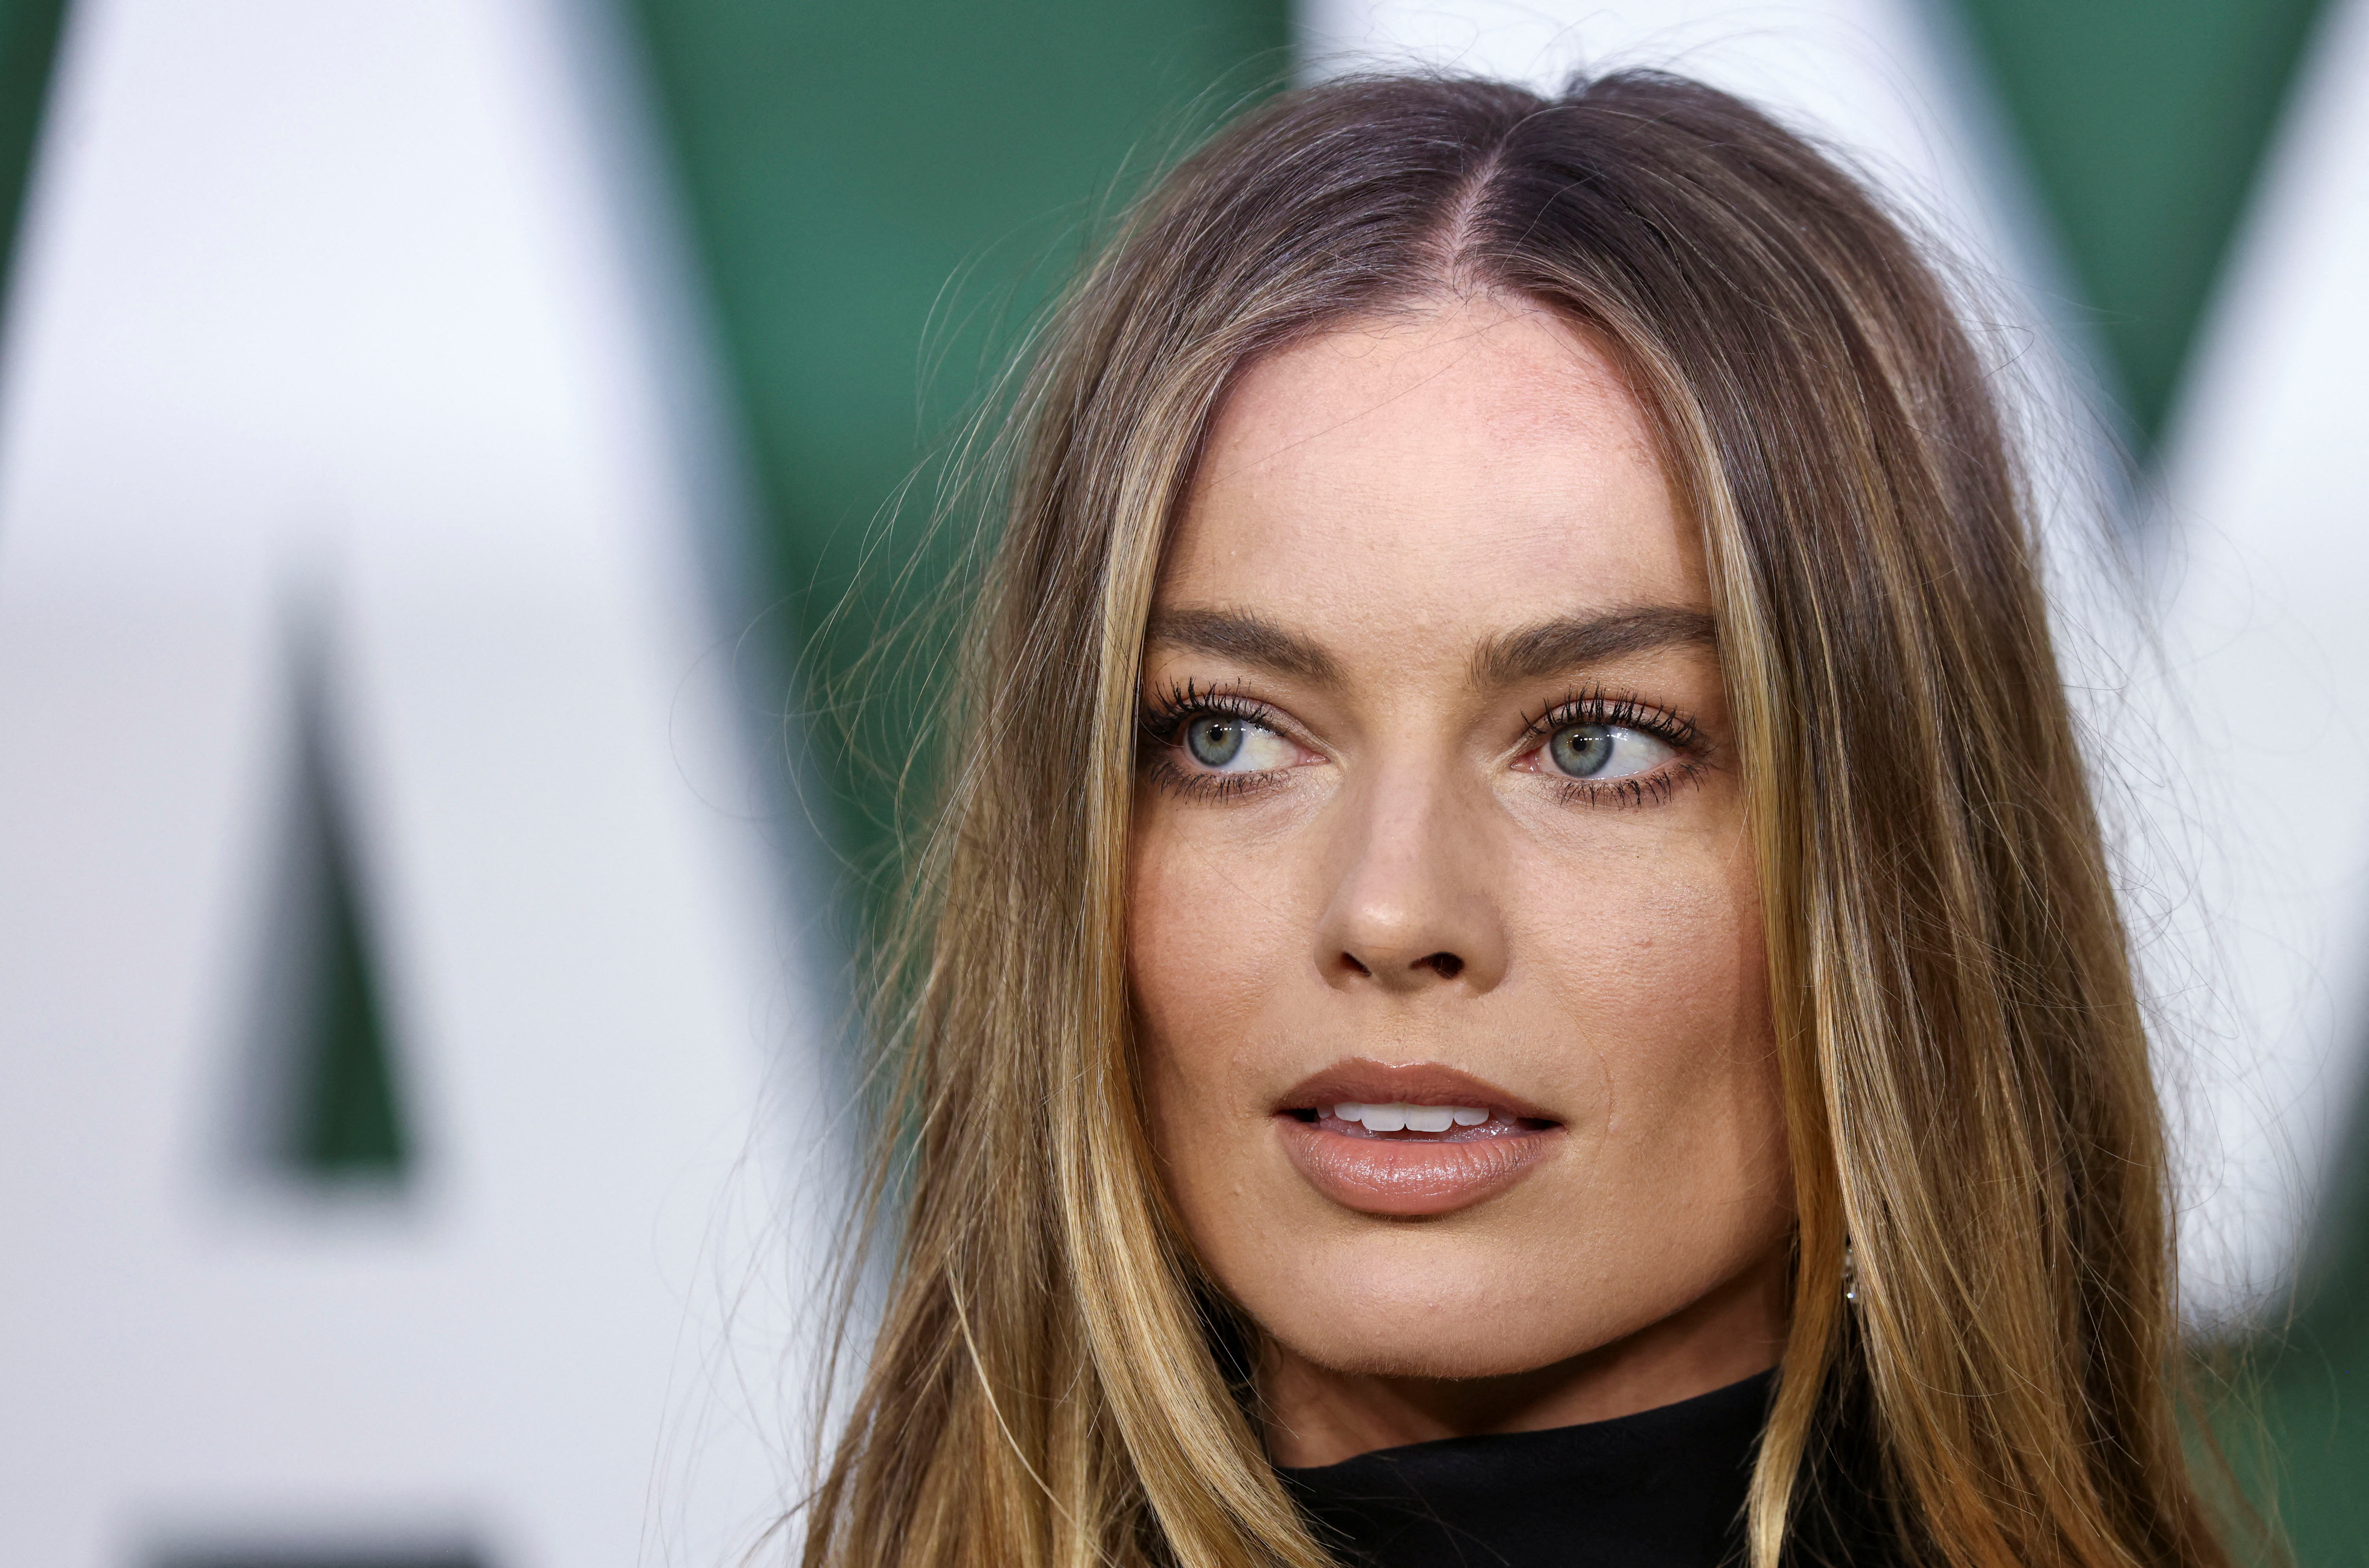 Margot Robbie at the premiere of "Amsterdam" which took place in London on September 21, 2022. (Photo: REUTERS/Tom Nicholson)